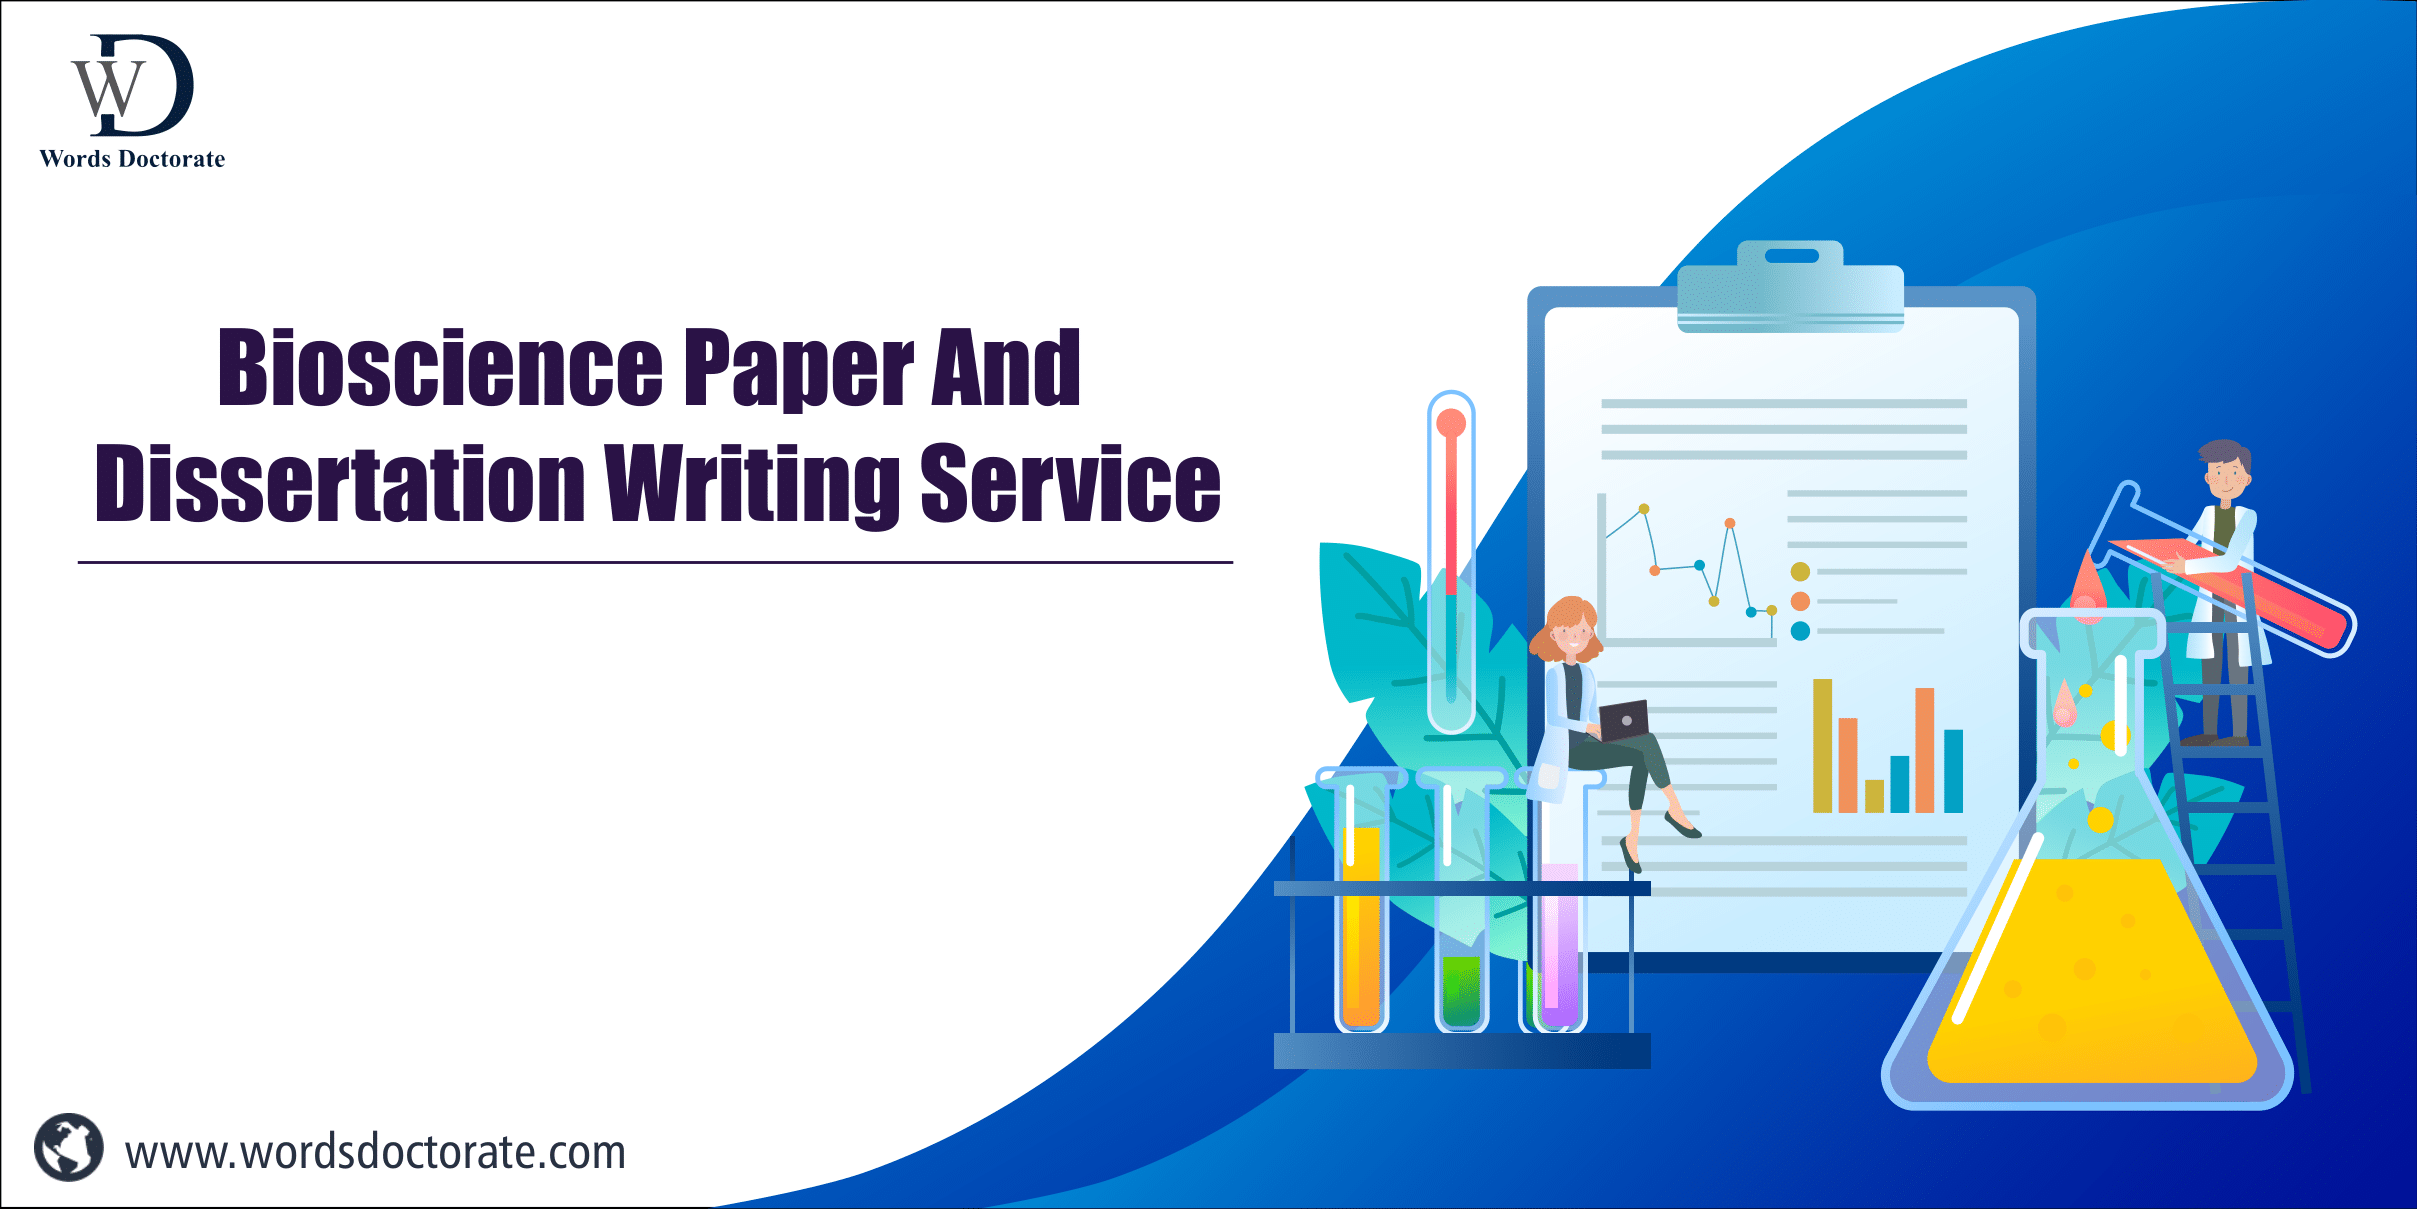 Bioscience Paper And Dissertation Writing Service